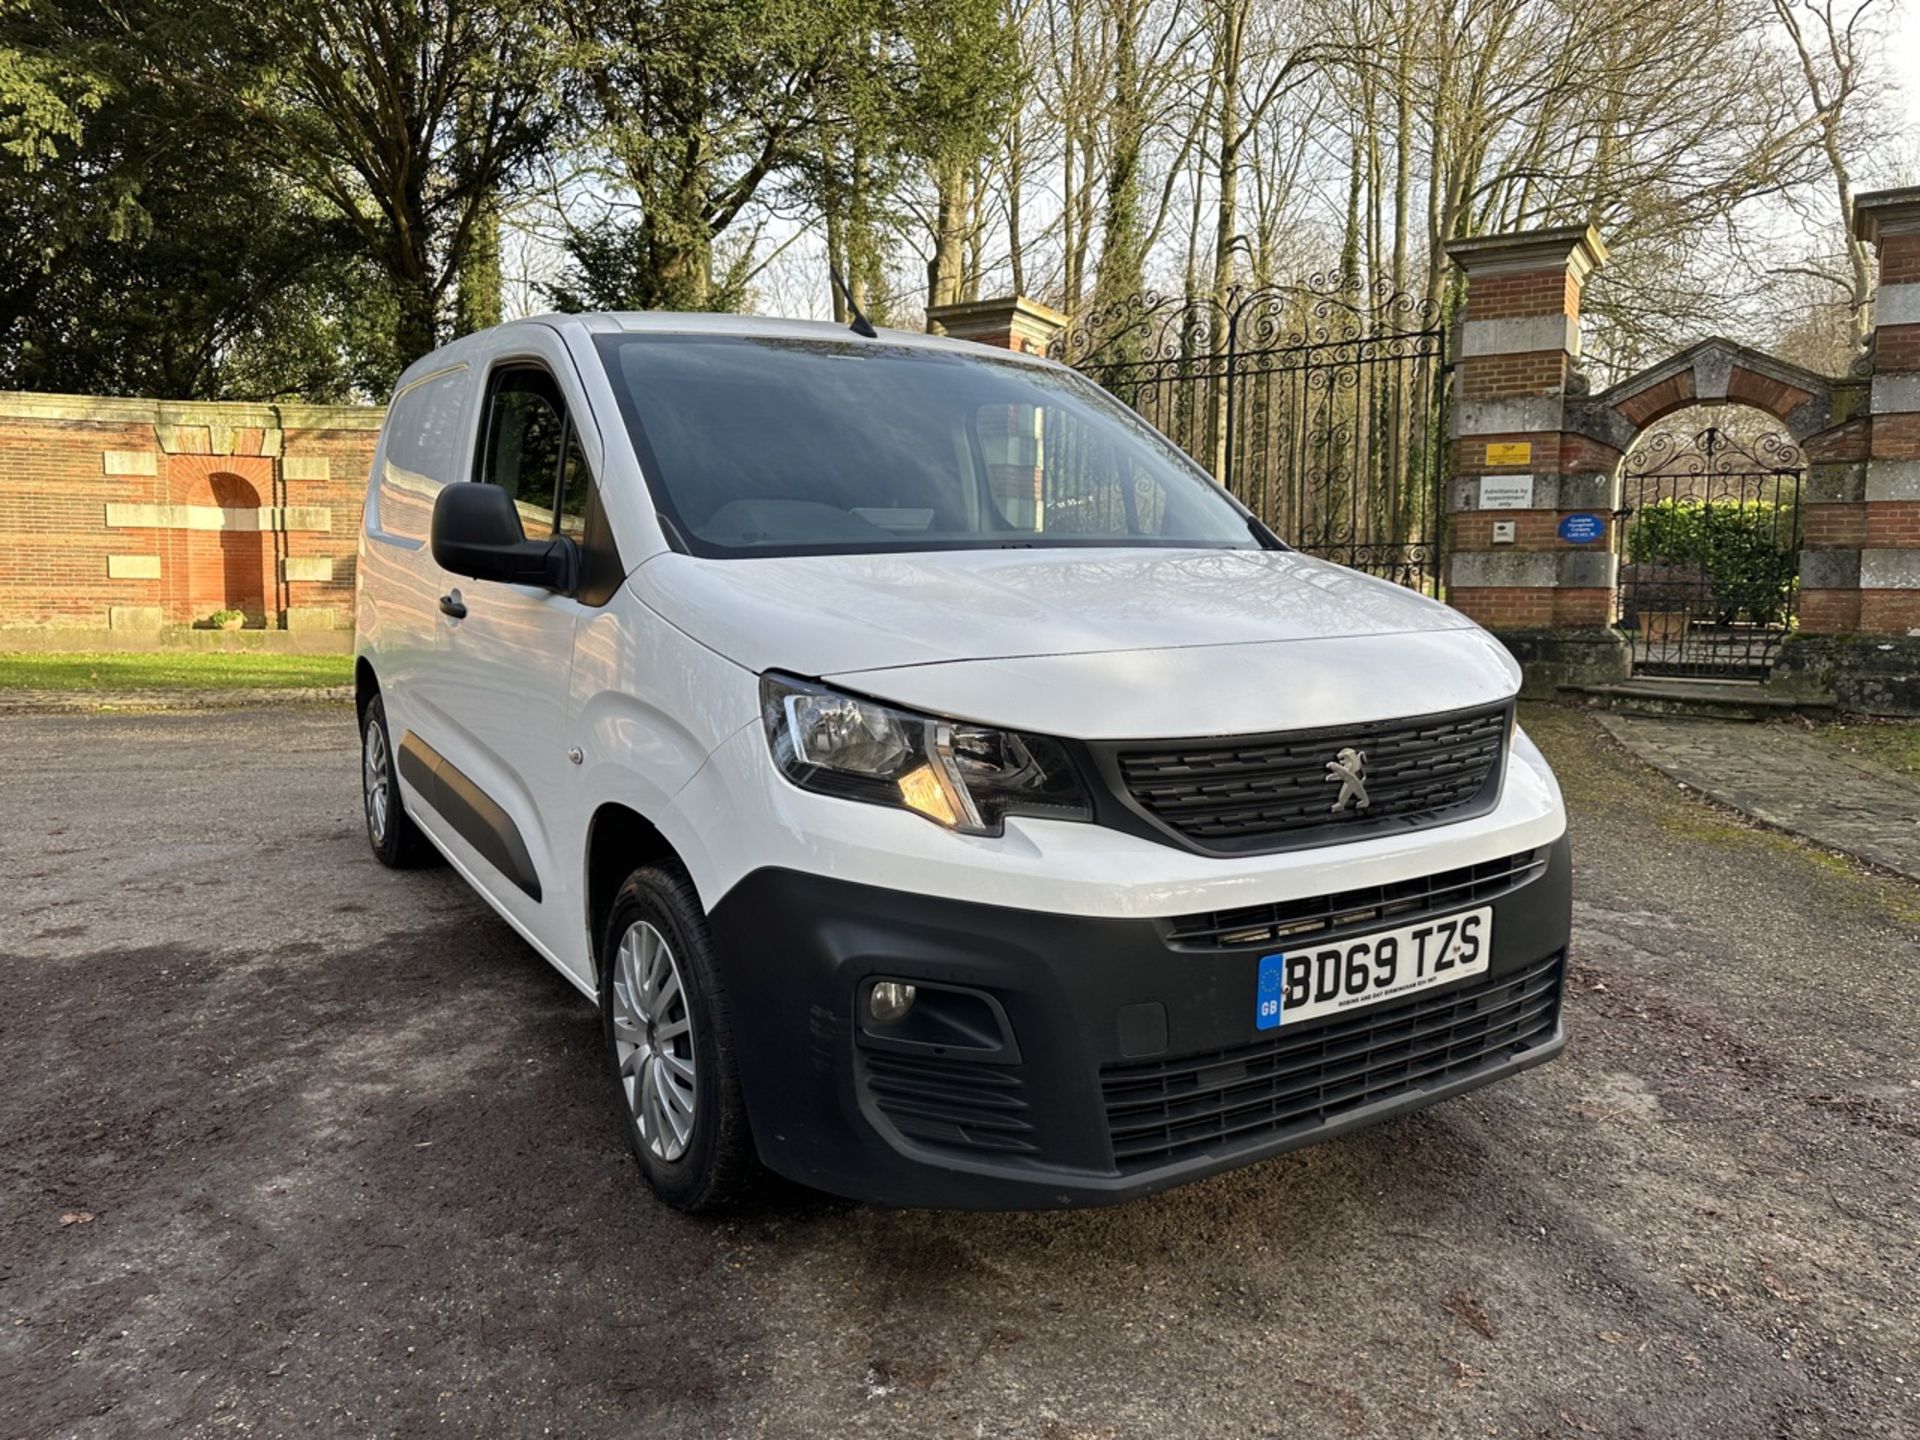 (RESERVE MET) PEUGEOT PARTNER Professional (2020 Model ) Air Con - 3 Seater - Service History Print - Image 2 of 22